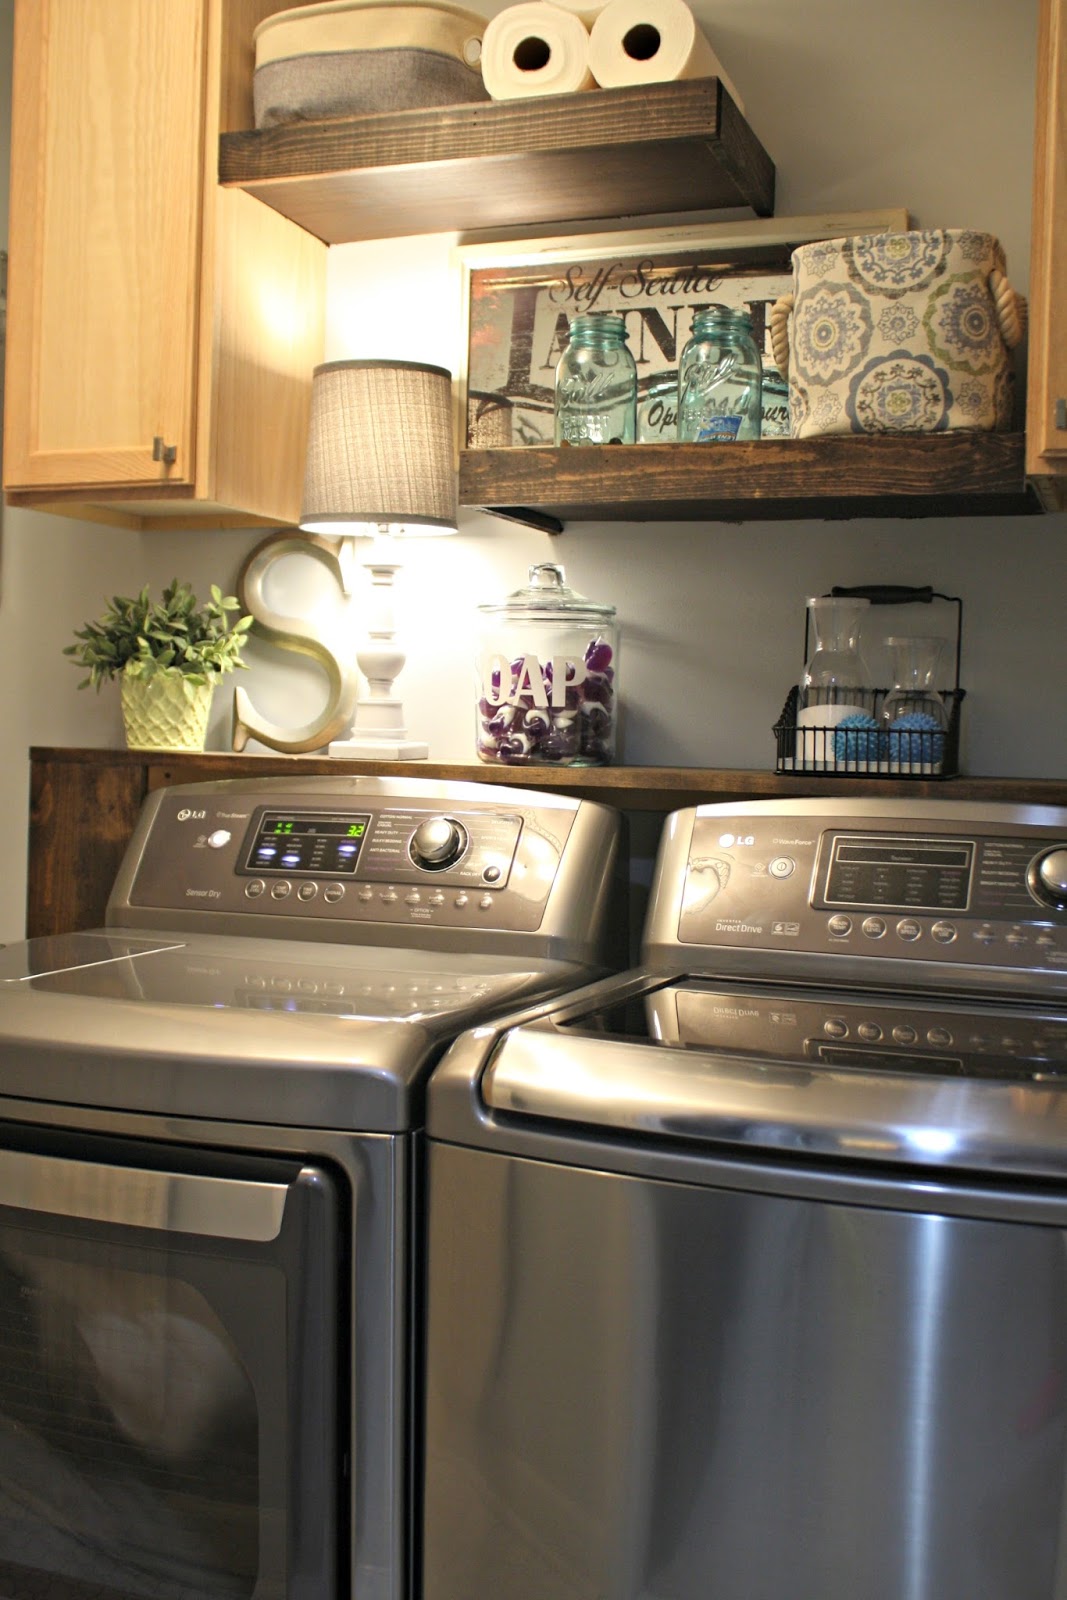 LG Washer And Dryer Review Four Years Later Thrifty Decor Chick 